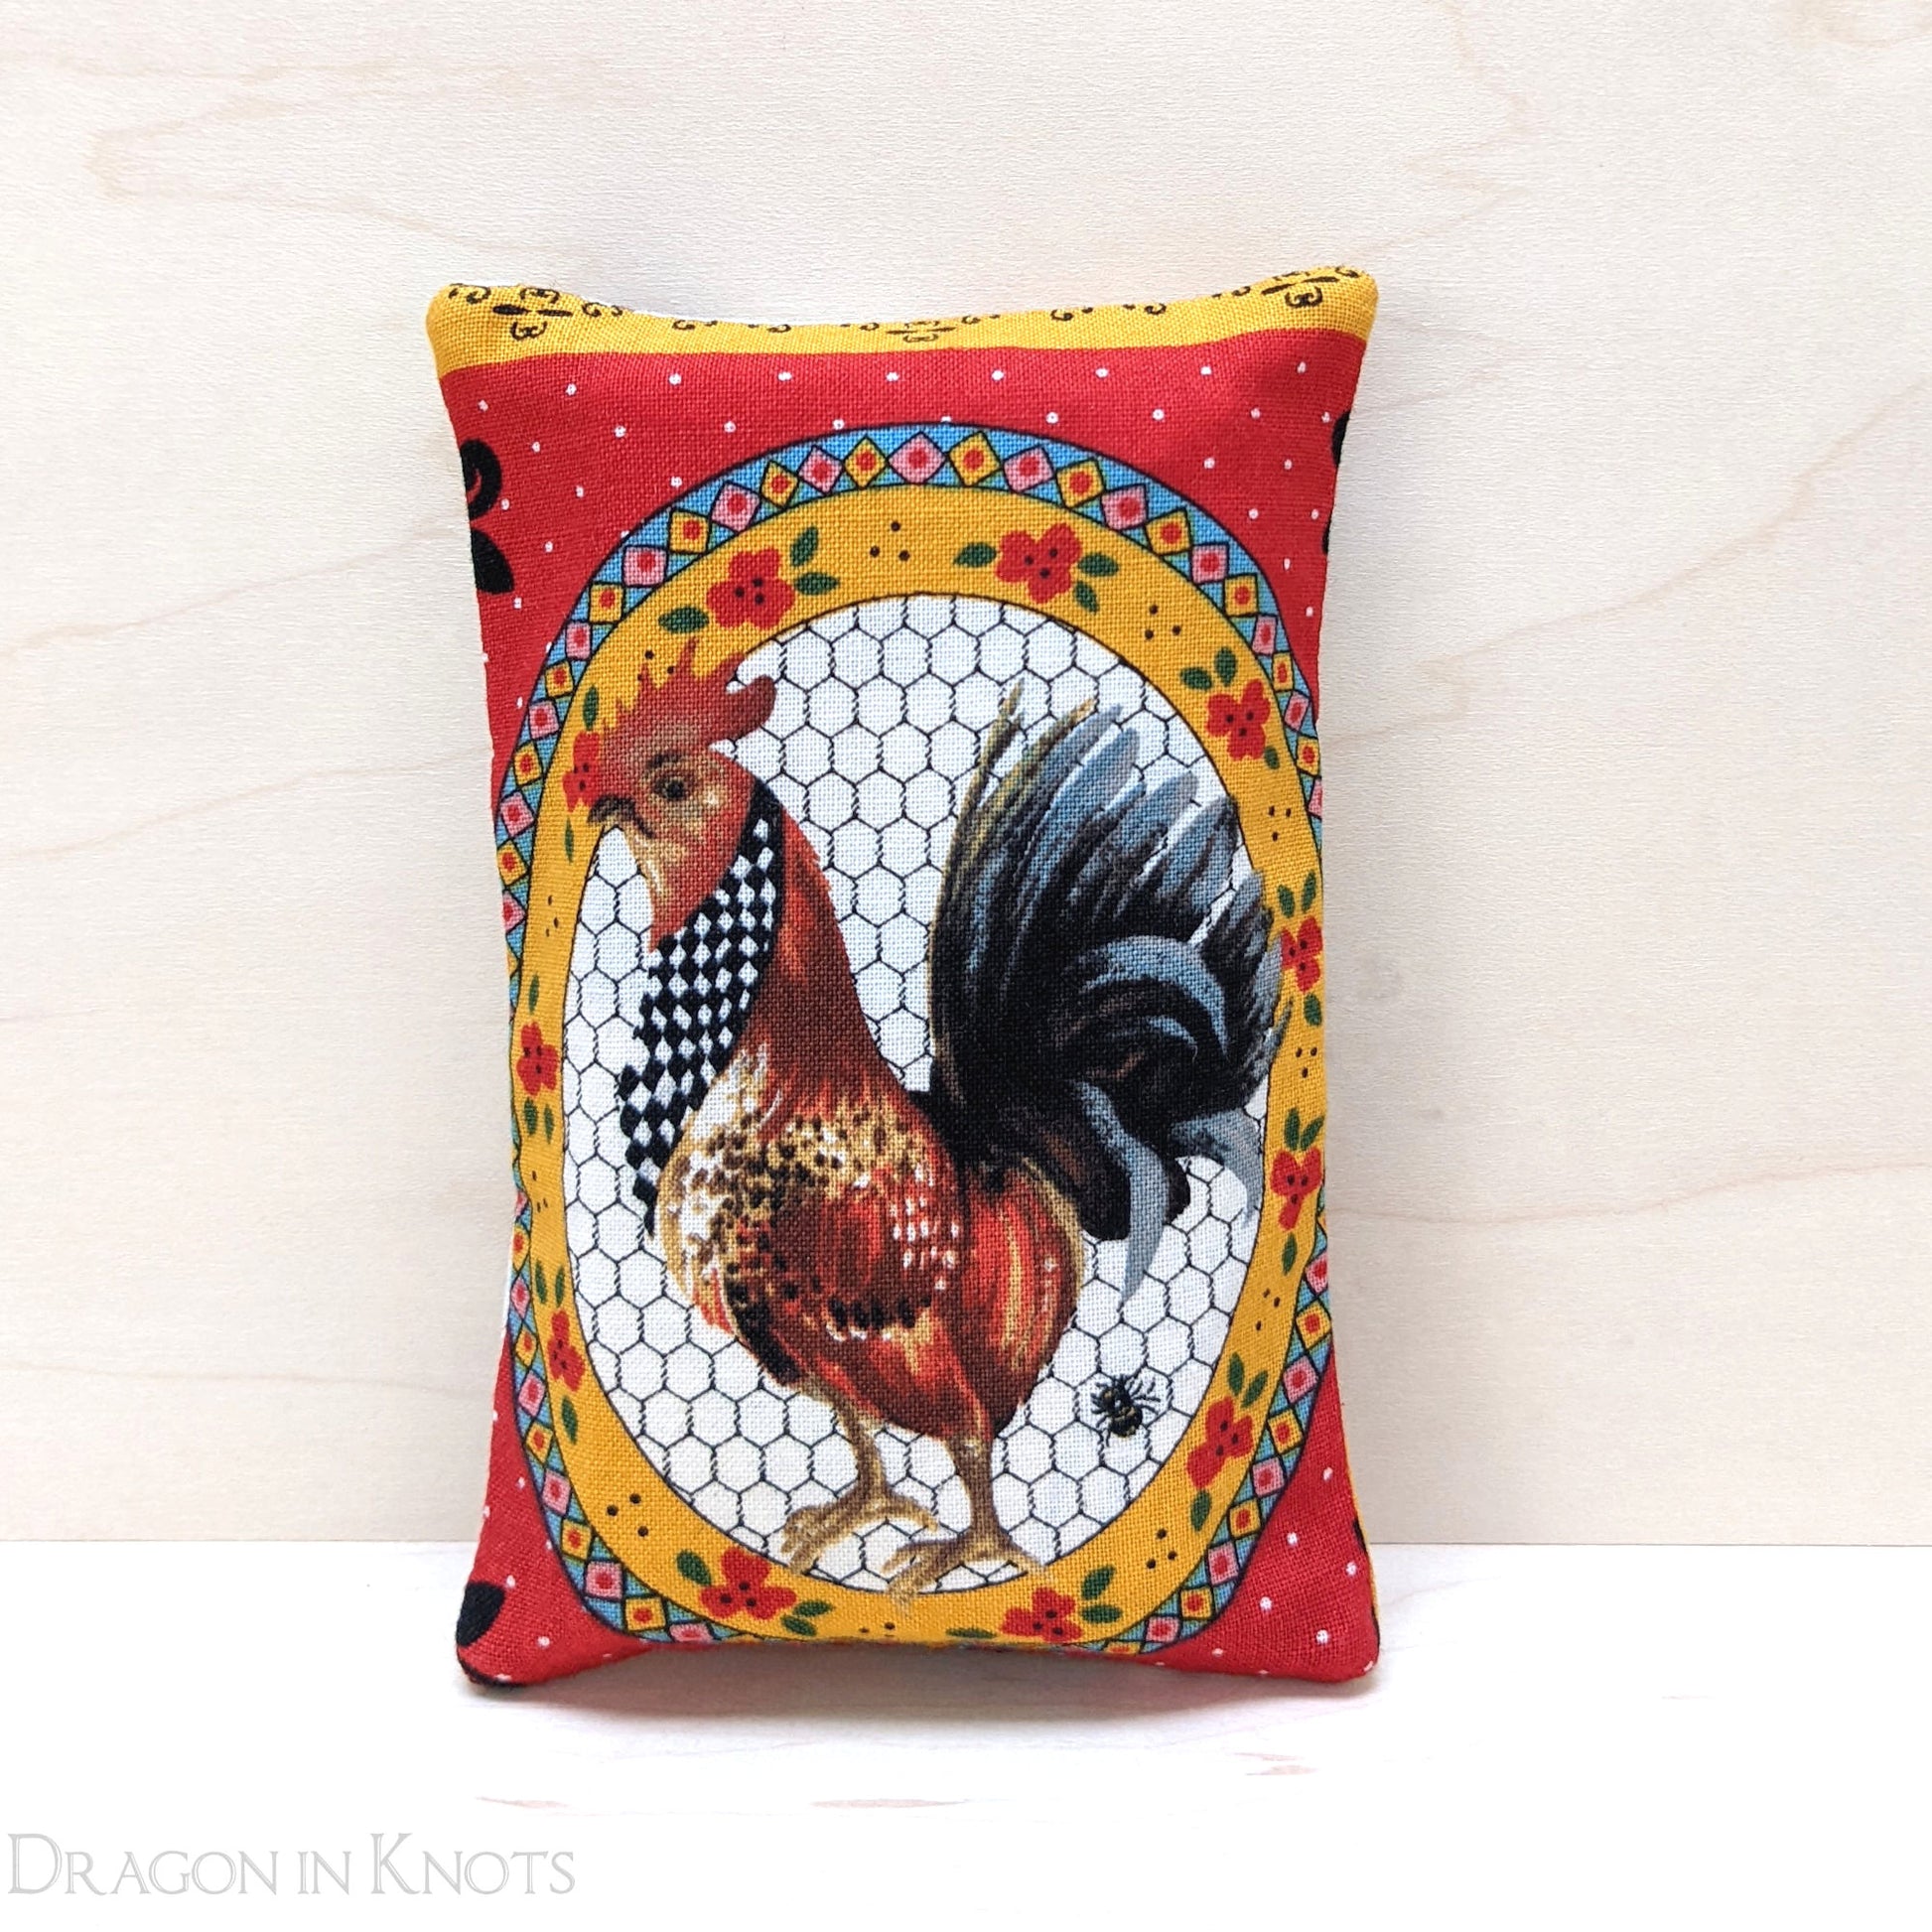 Rooster To-Go Tissue Holder - Dragon in Knots handmade